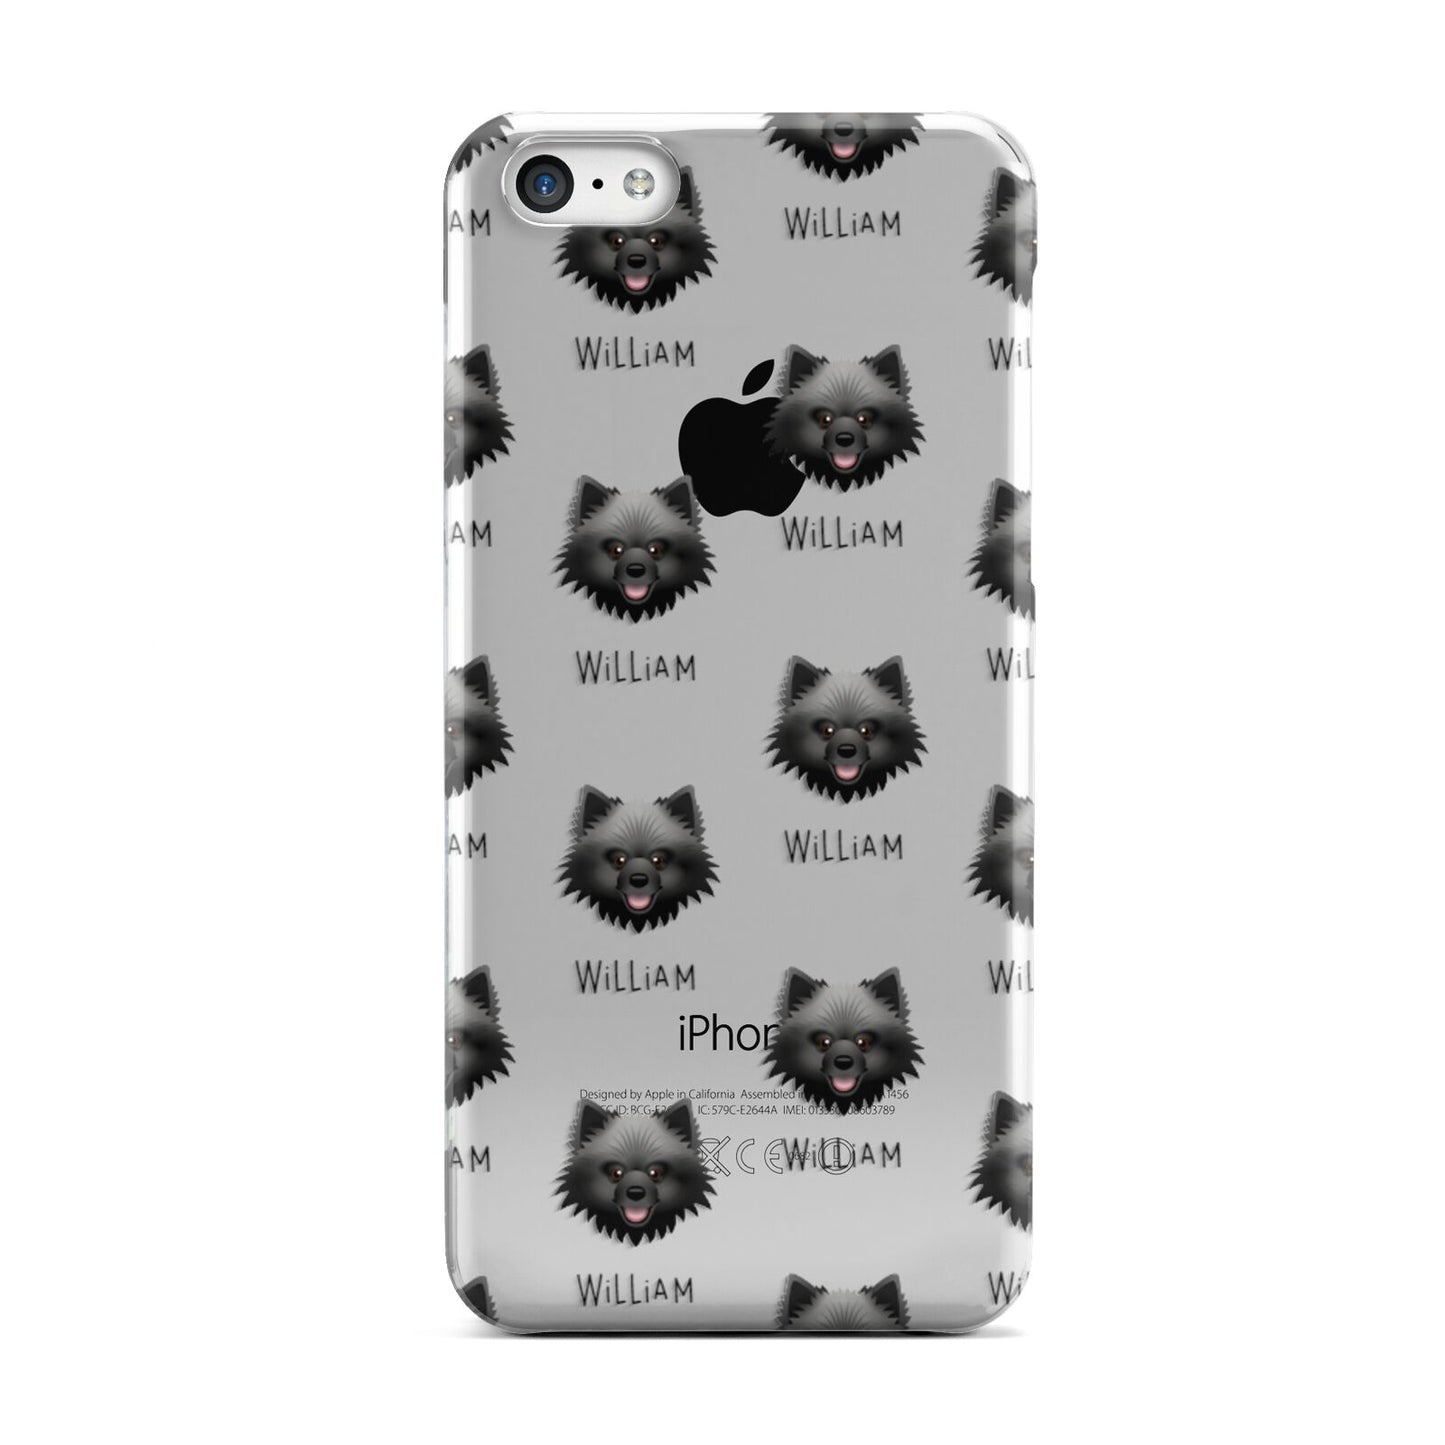 Keeshond Icon with Name Apple iPhone 5c Case